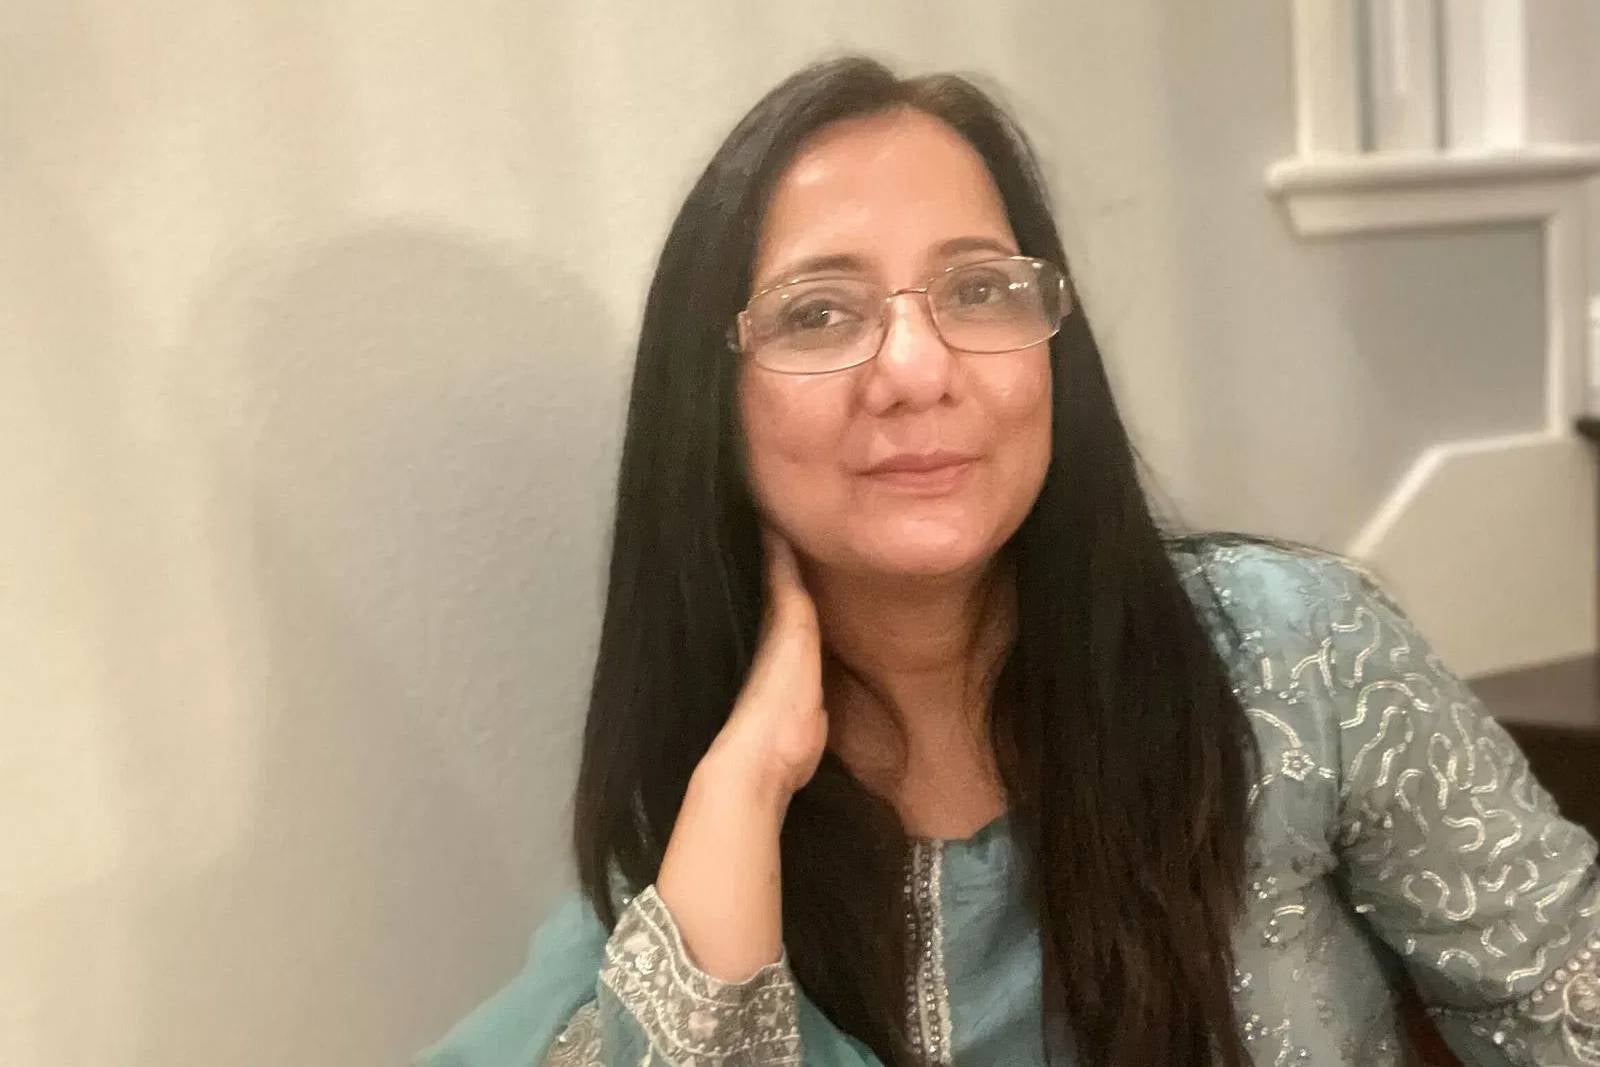 Talat Jehan Khan, a 52-year-old paediatrician, died after being stabbed multiple times on 28 October at an apartment complex in Conroe, north of Houston.